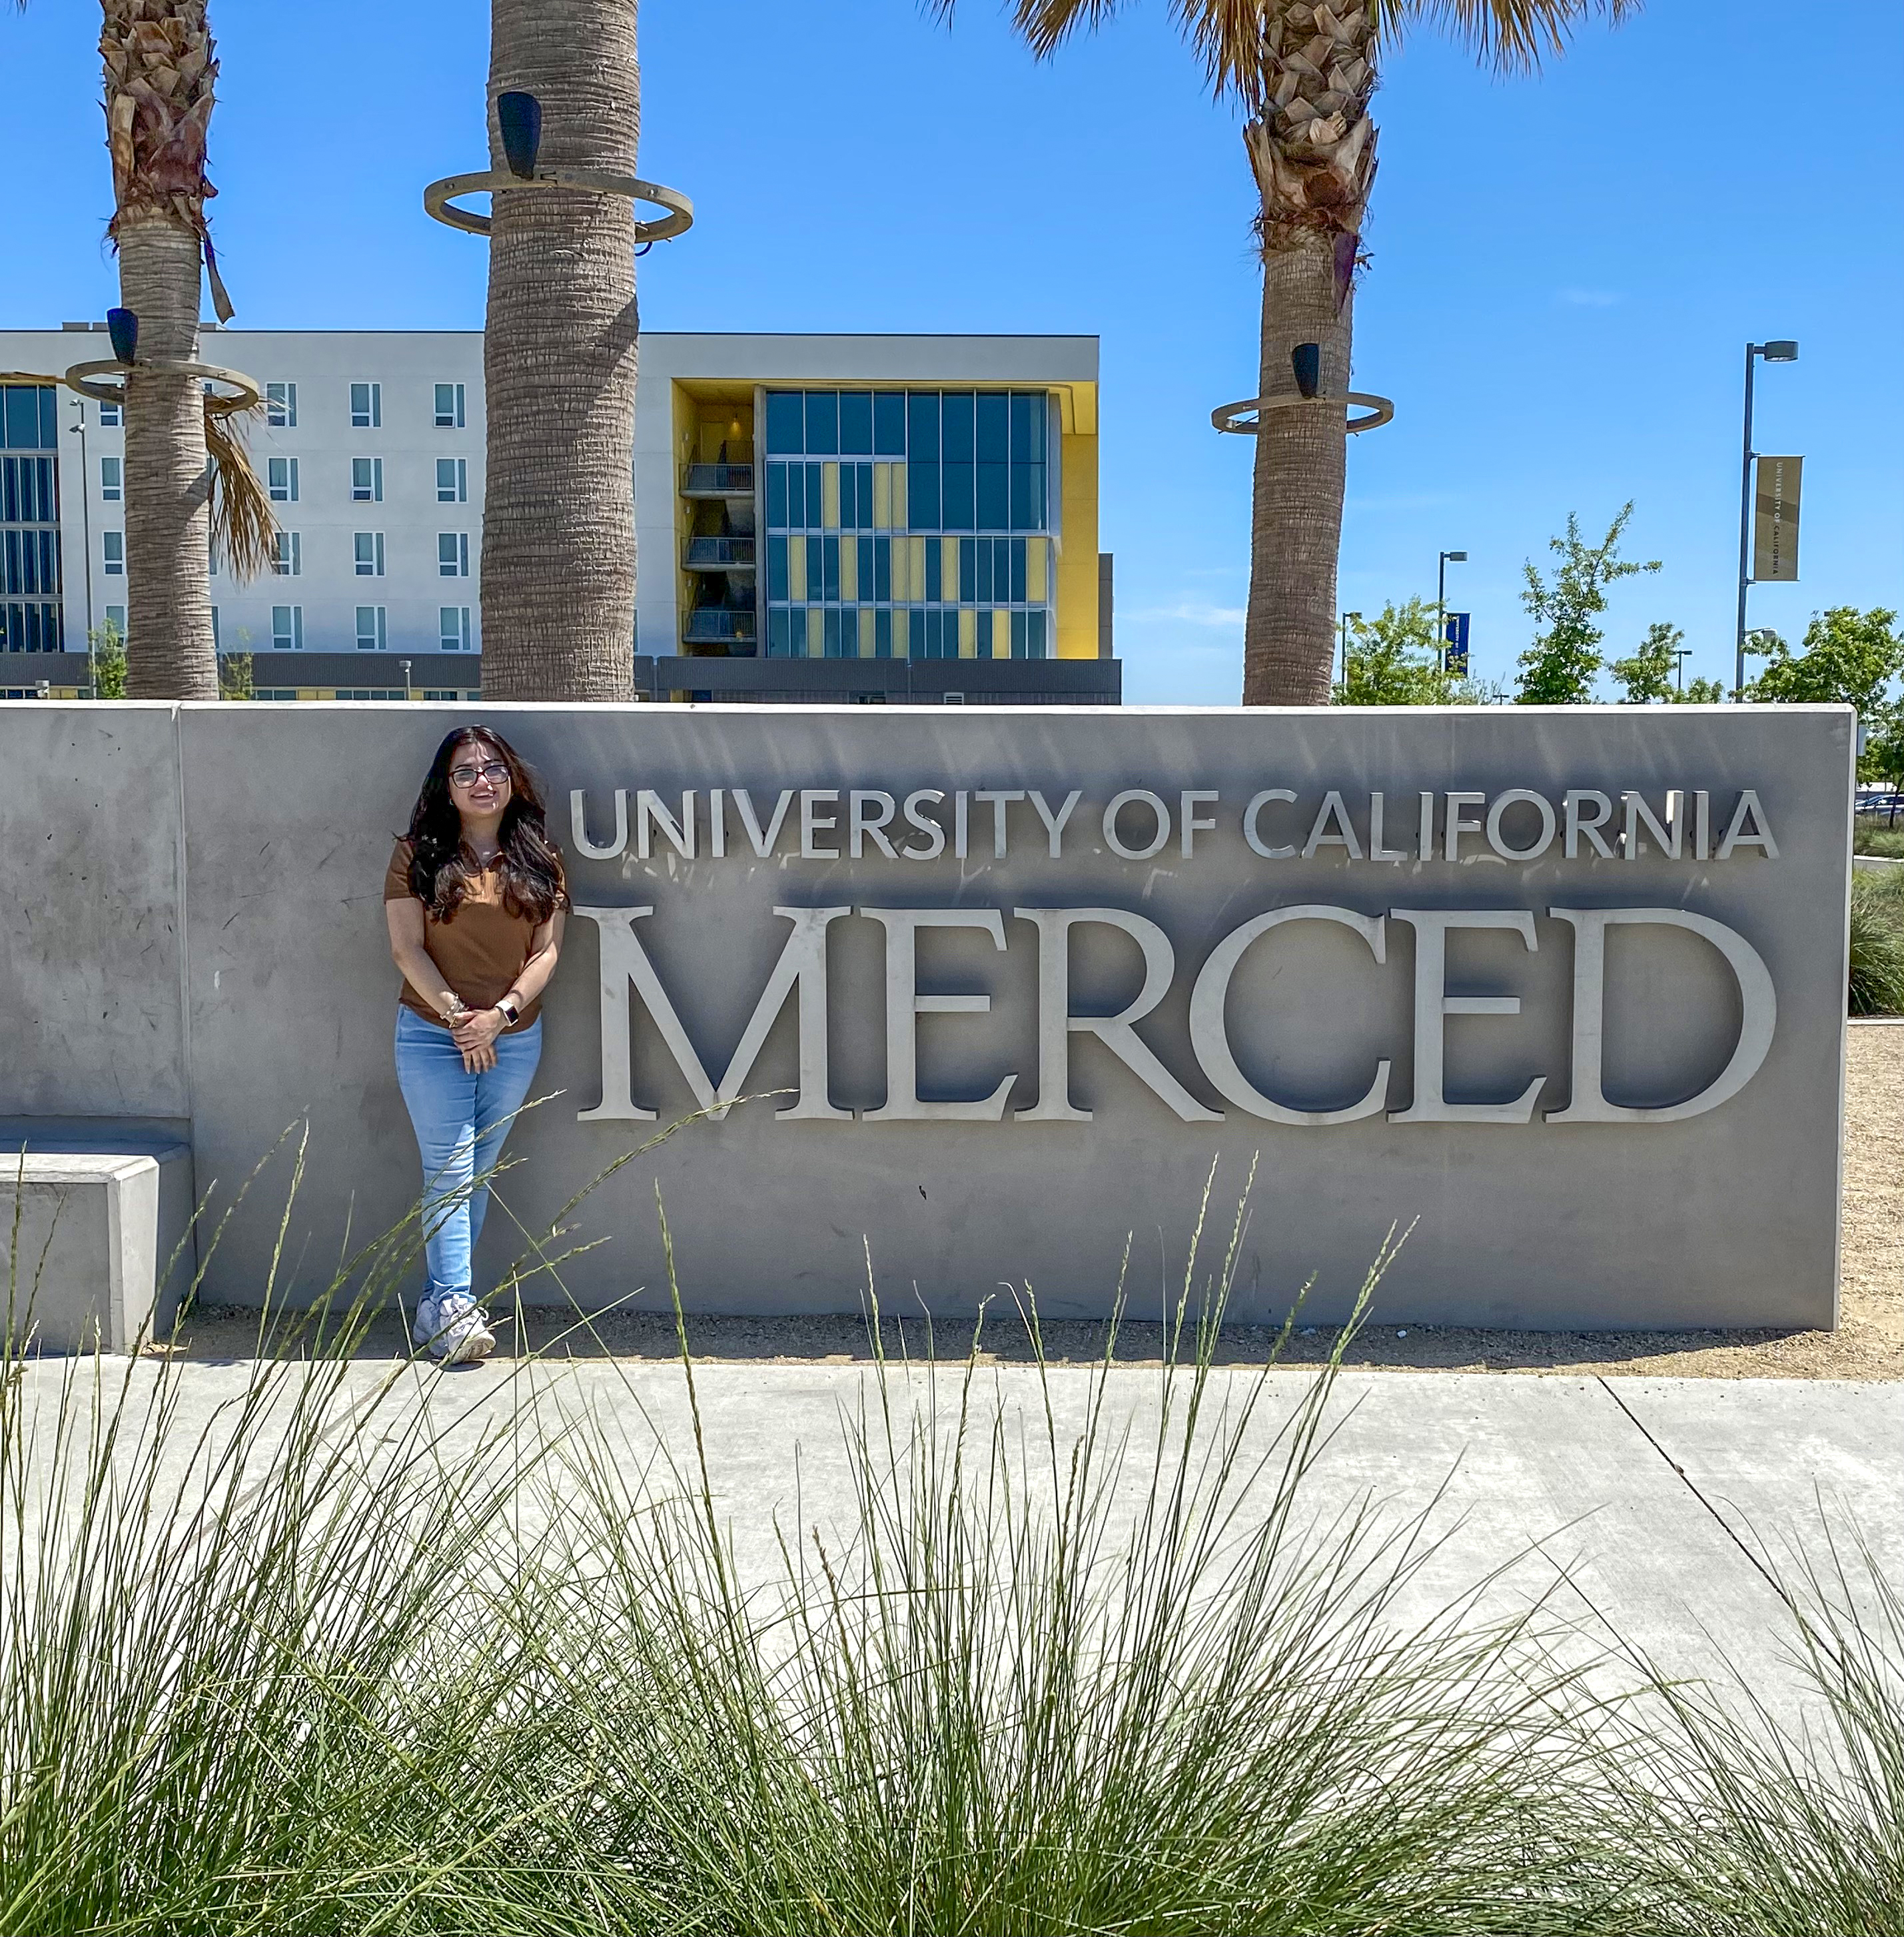 Genesis Iñiguez takes a photograph at UC Merced.